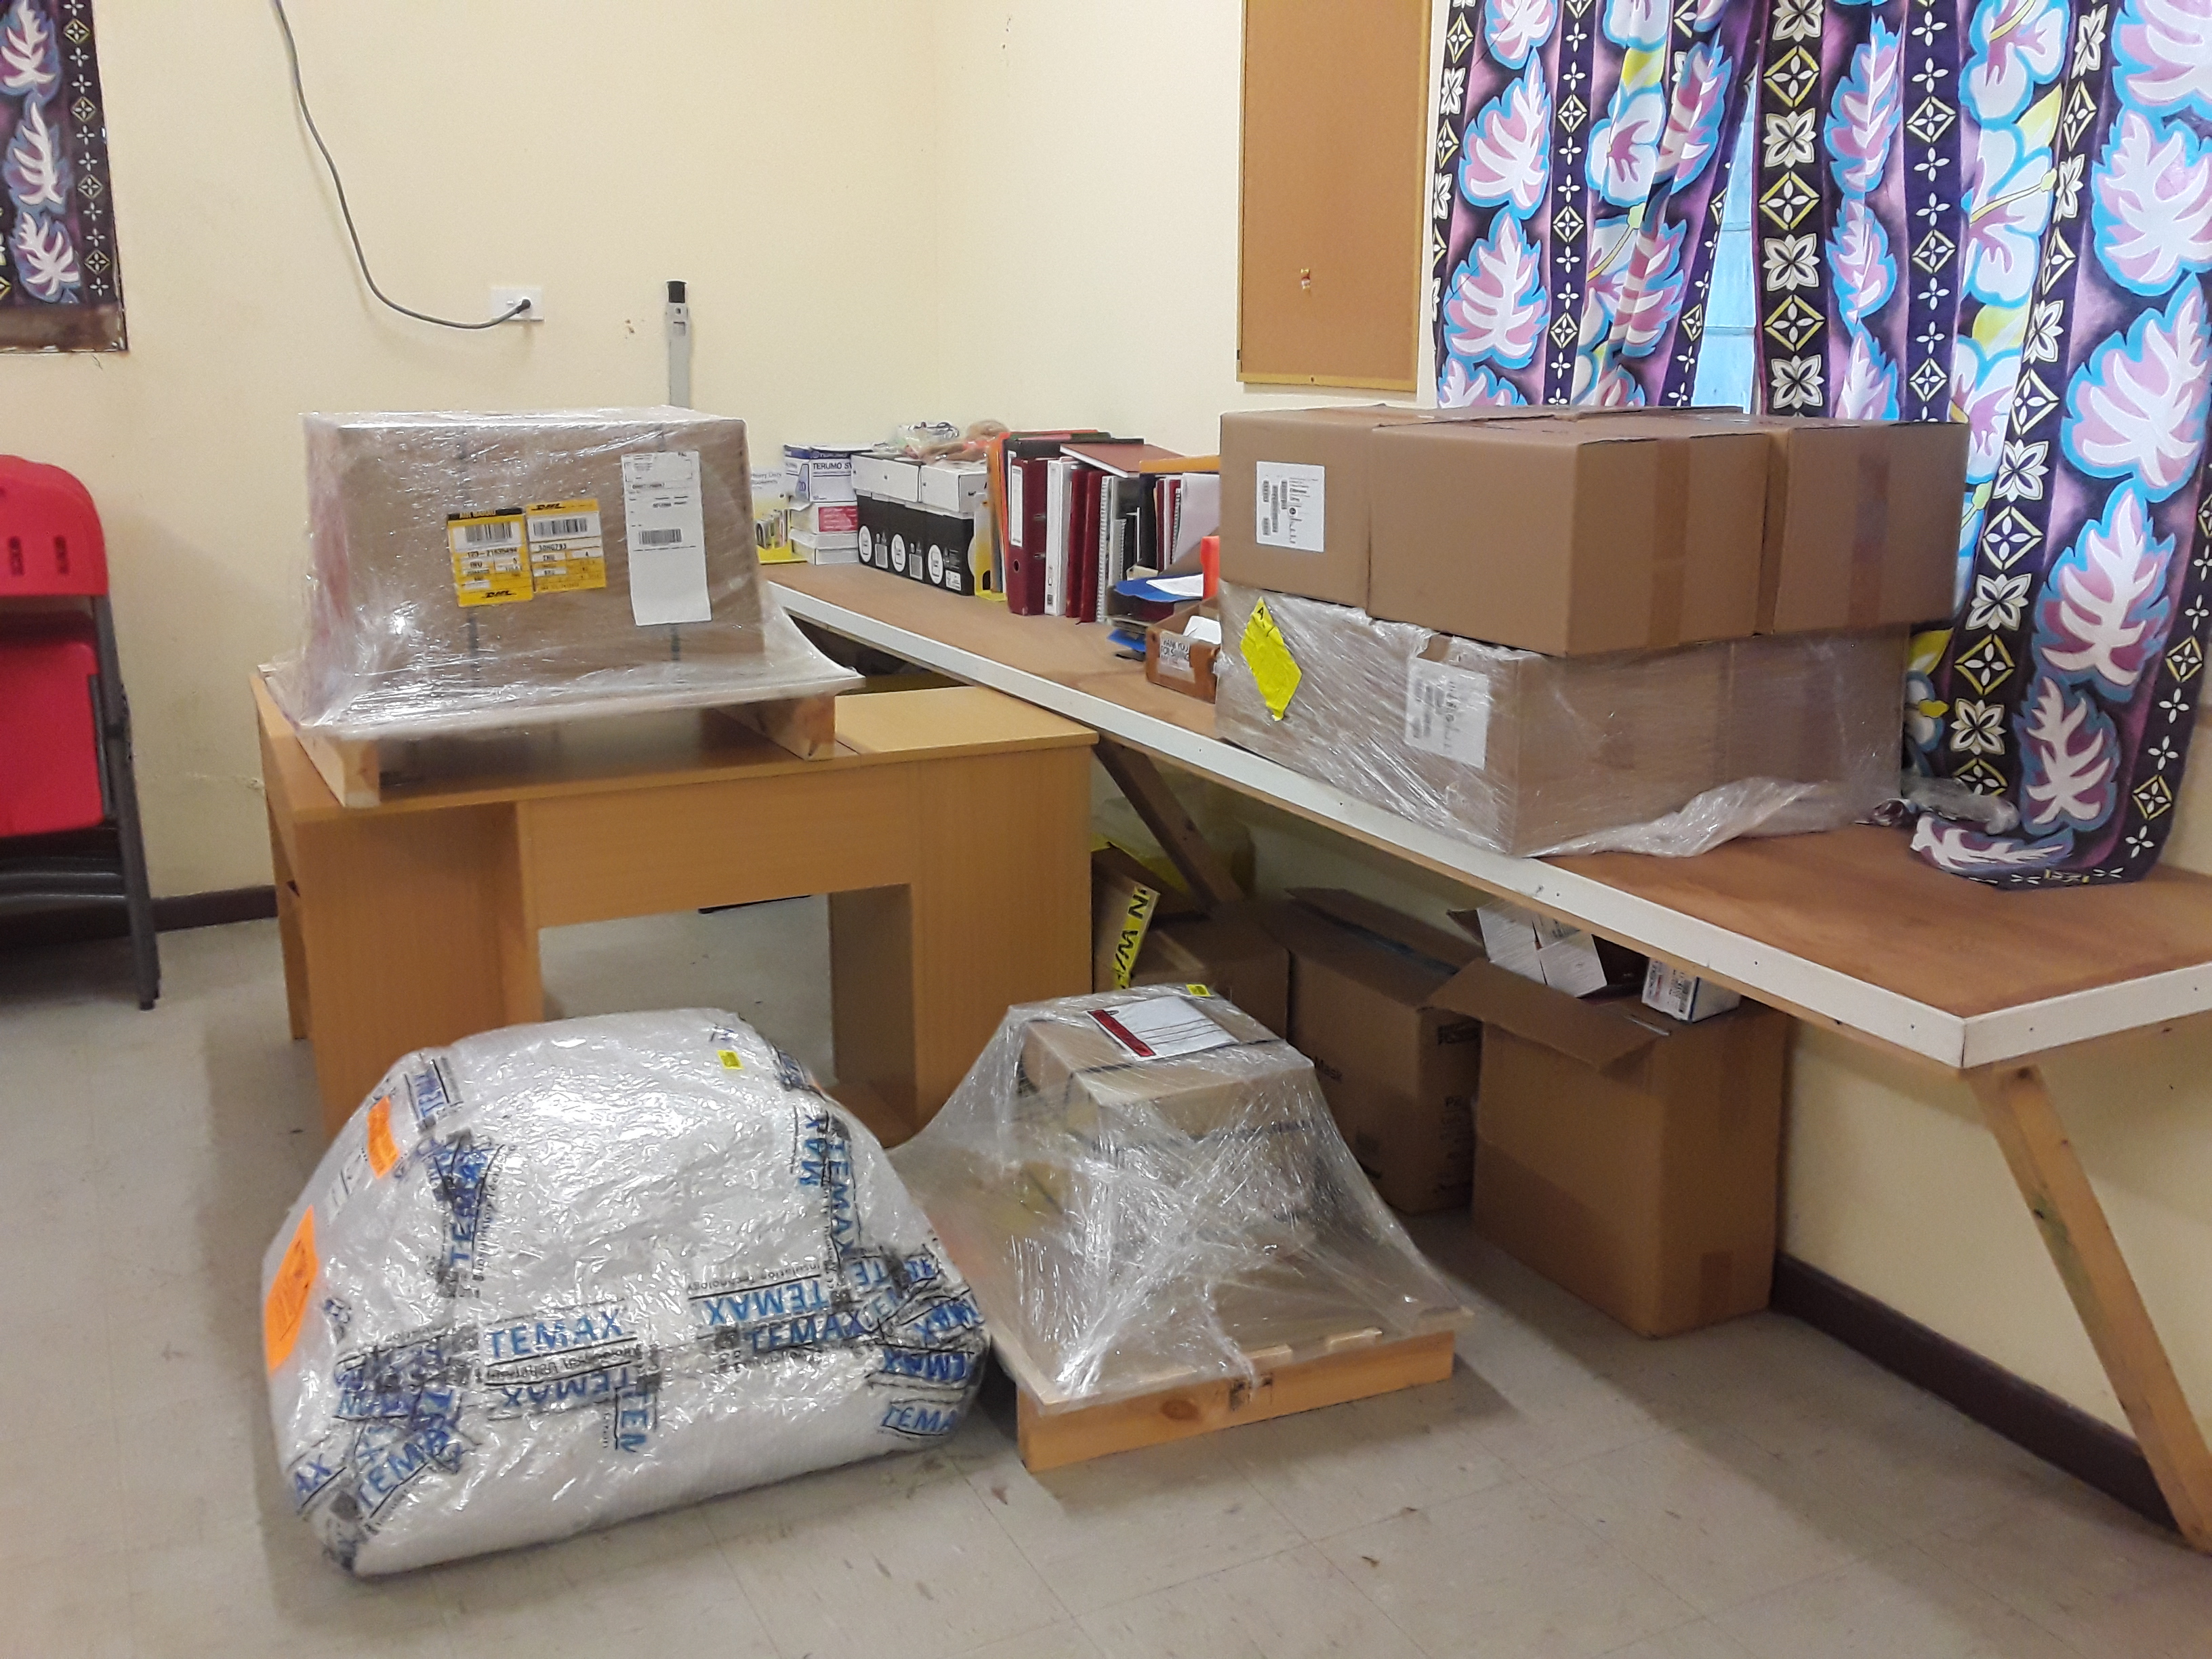 Nauru’s first-ever Zithromax® shipment arrived safely in the storeroom at the Public Health Eye Mini Dispensary in Denig, Nauru on March 27, 2020.